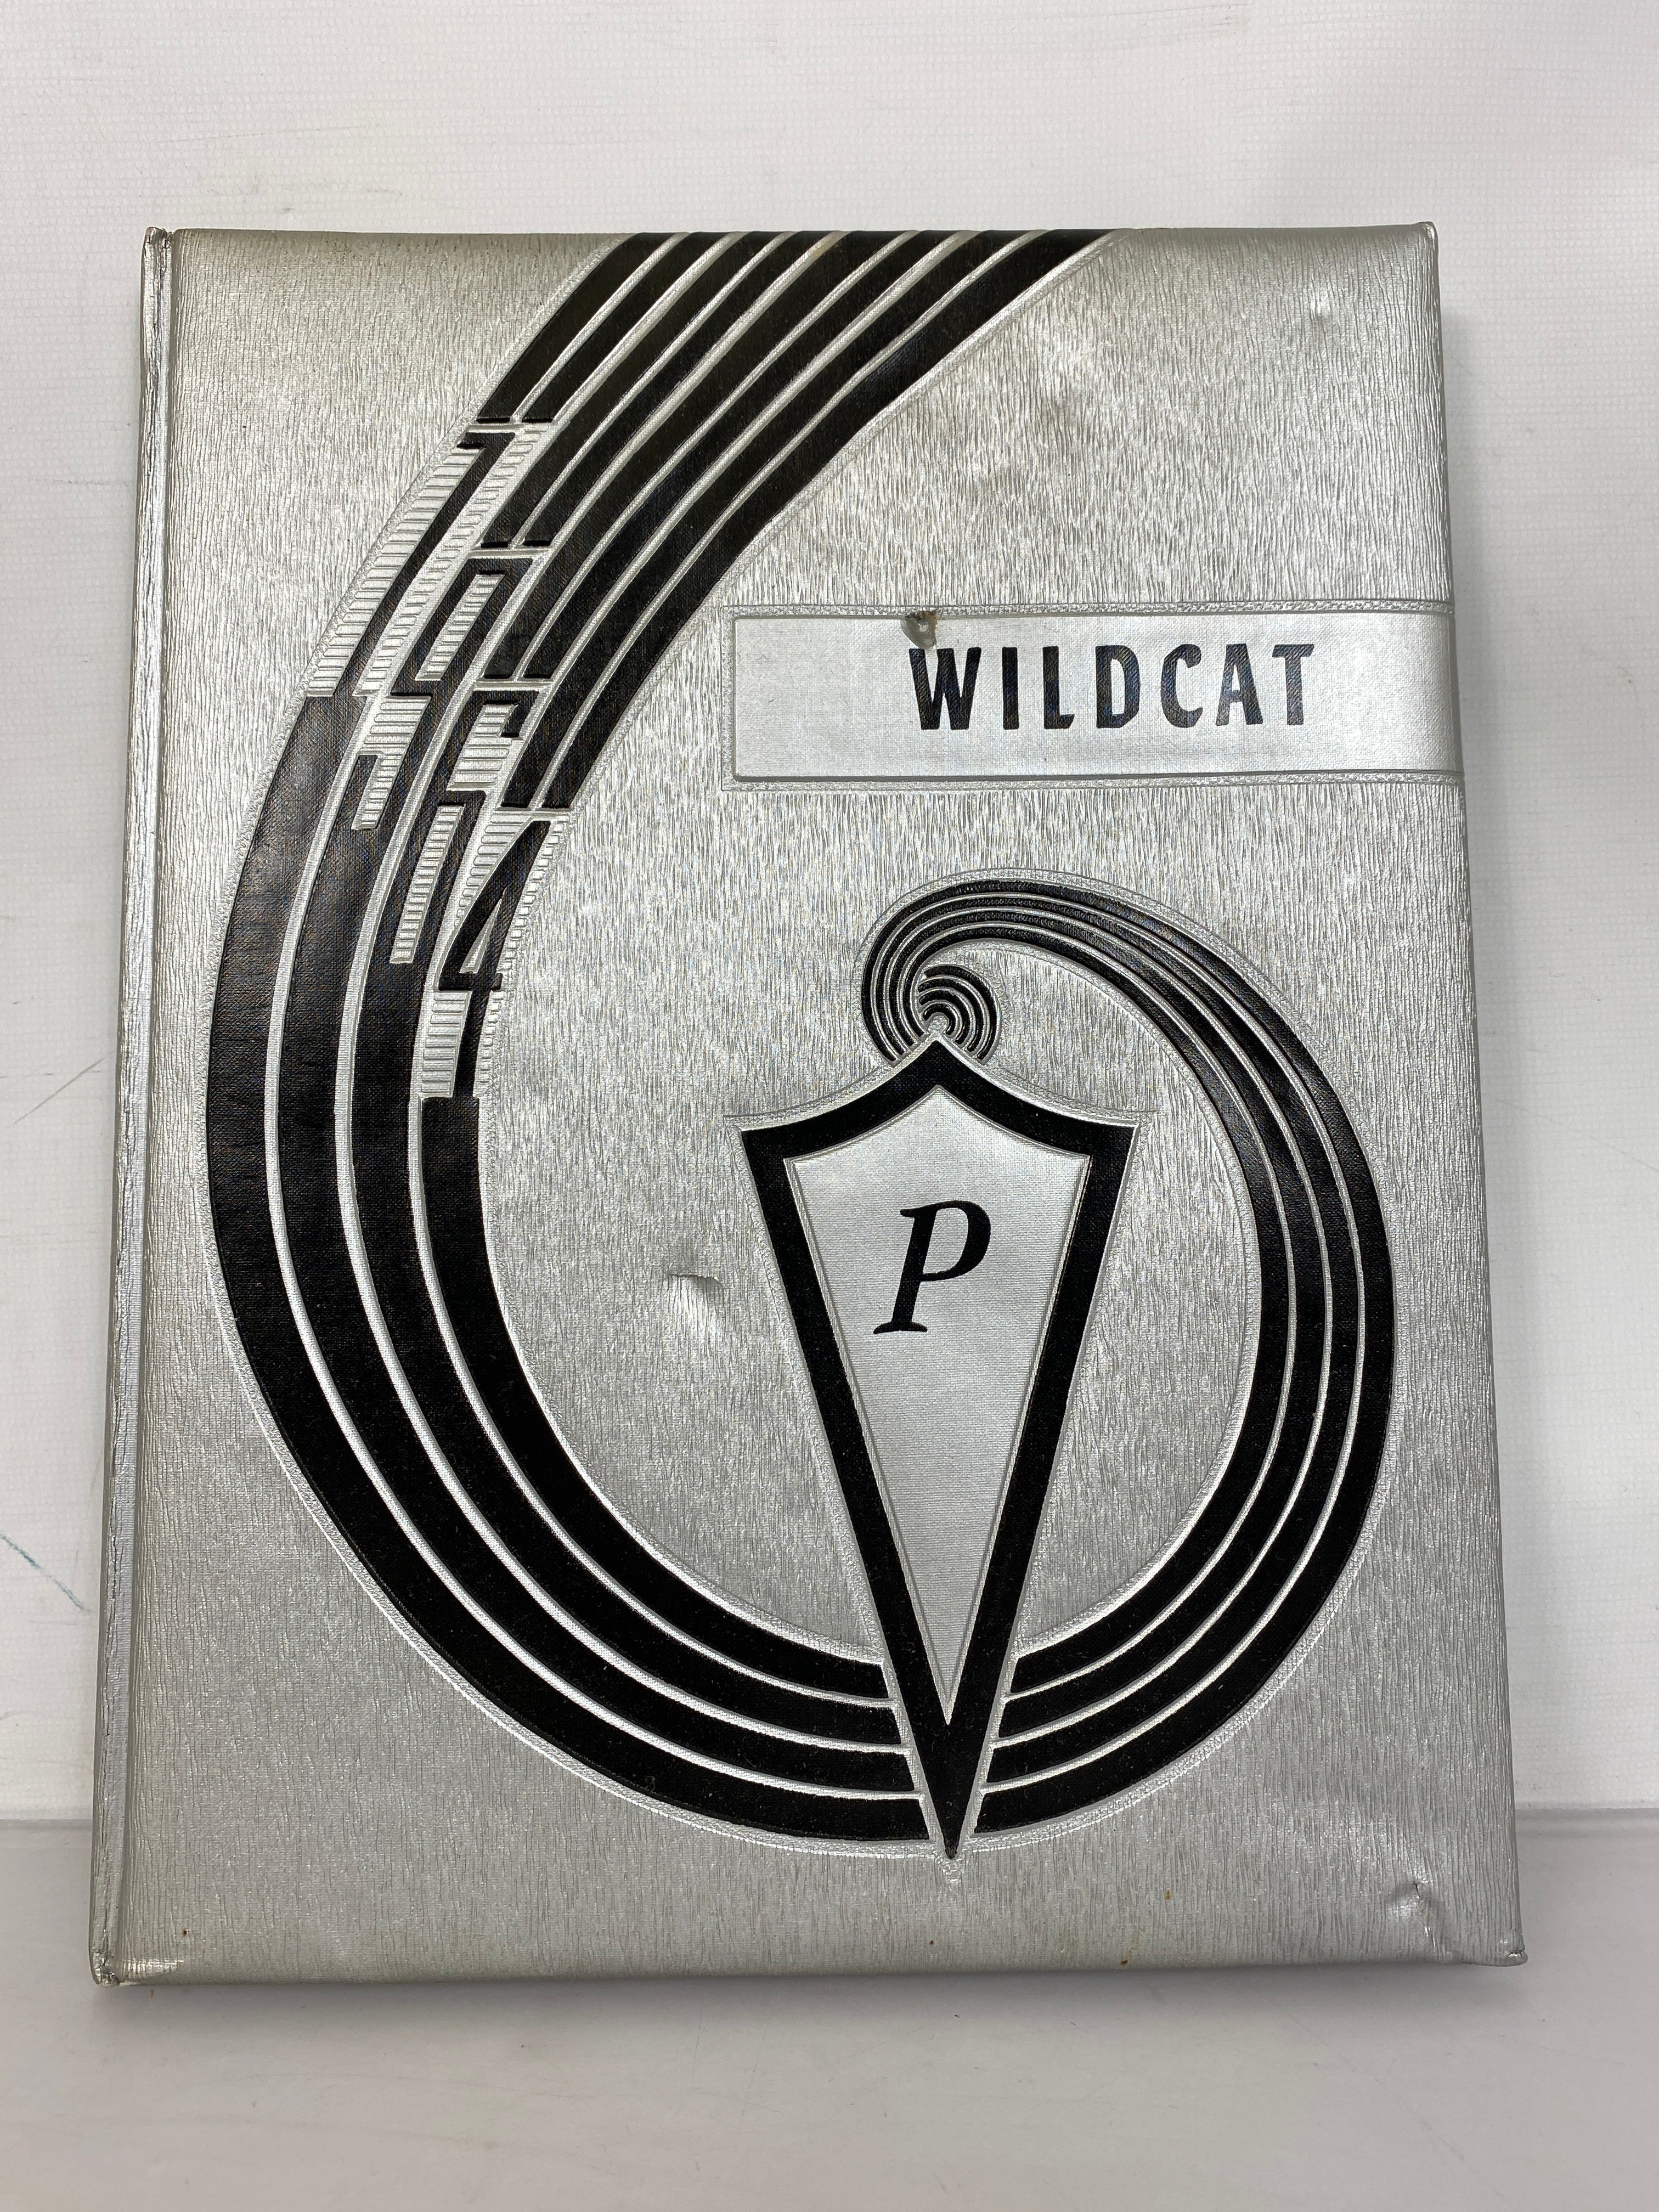 1964 Pittsford Rural Agricultural School "Wildcat" Pittsford Michigan